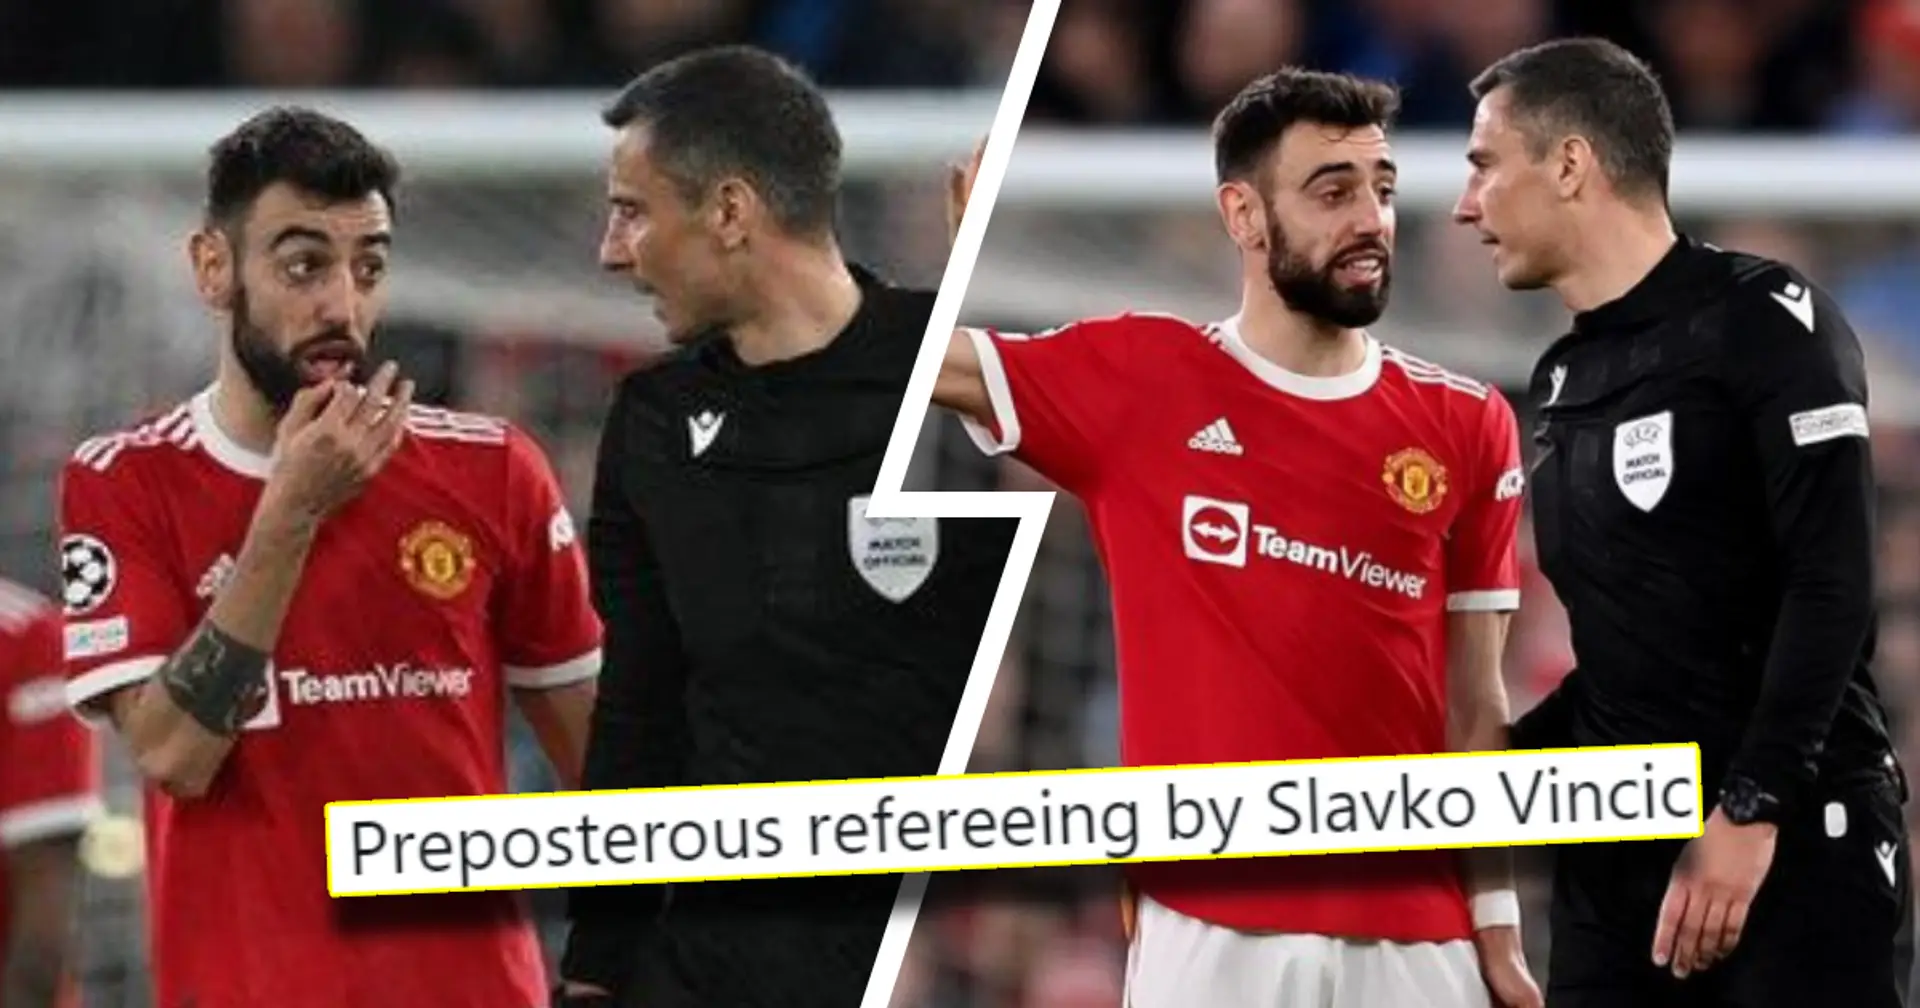 'You should be ashamed': Fans slam referee from Atletico game — it's his second United game this season